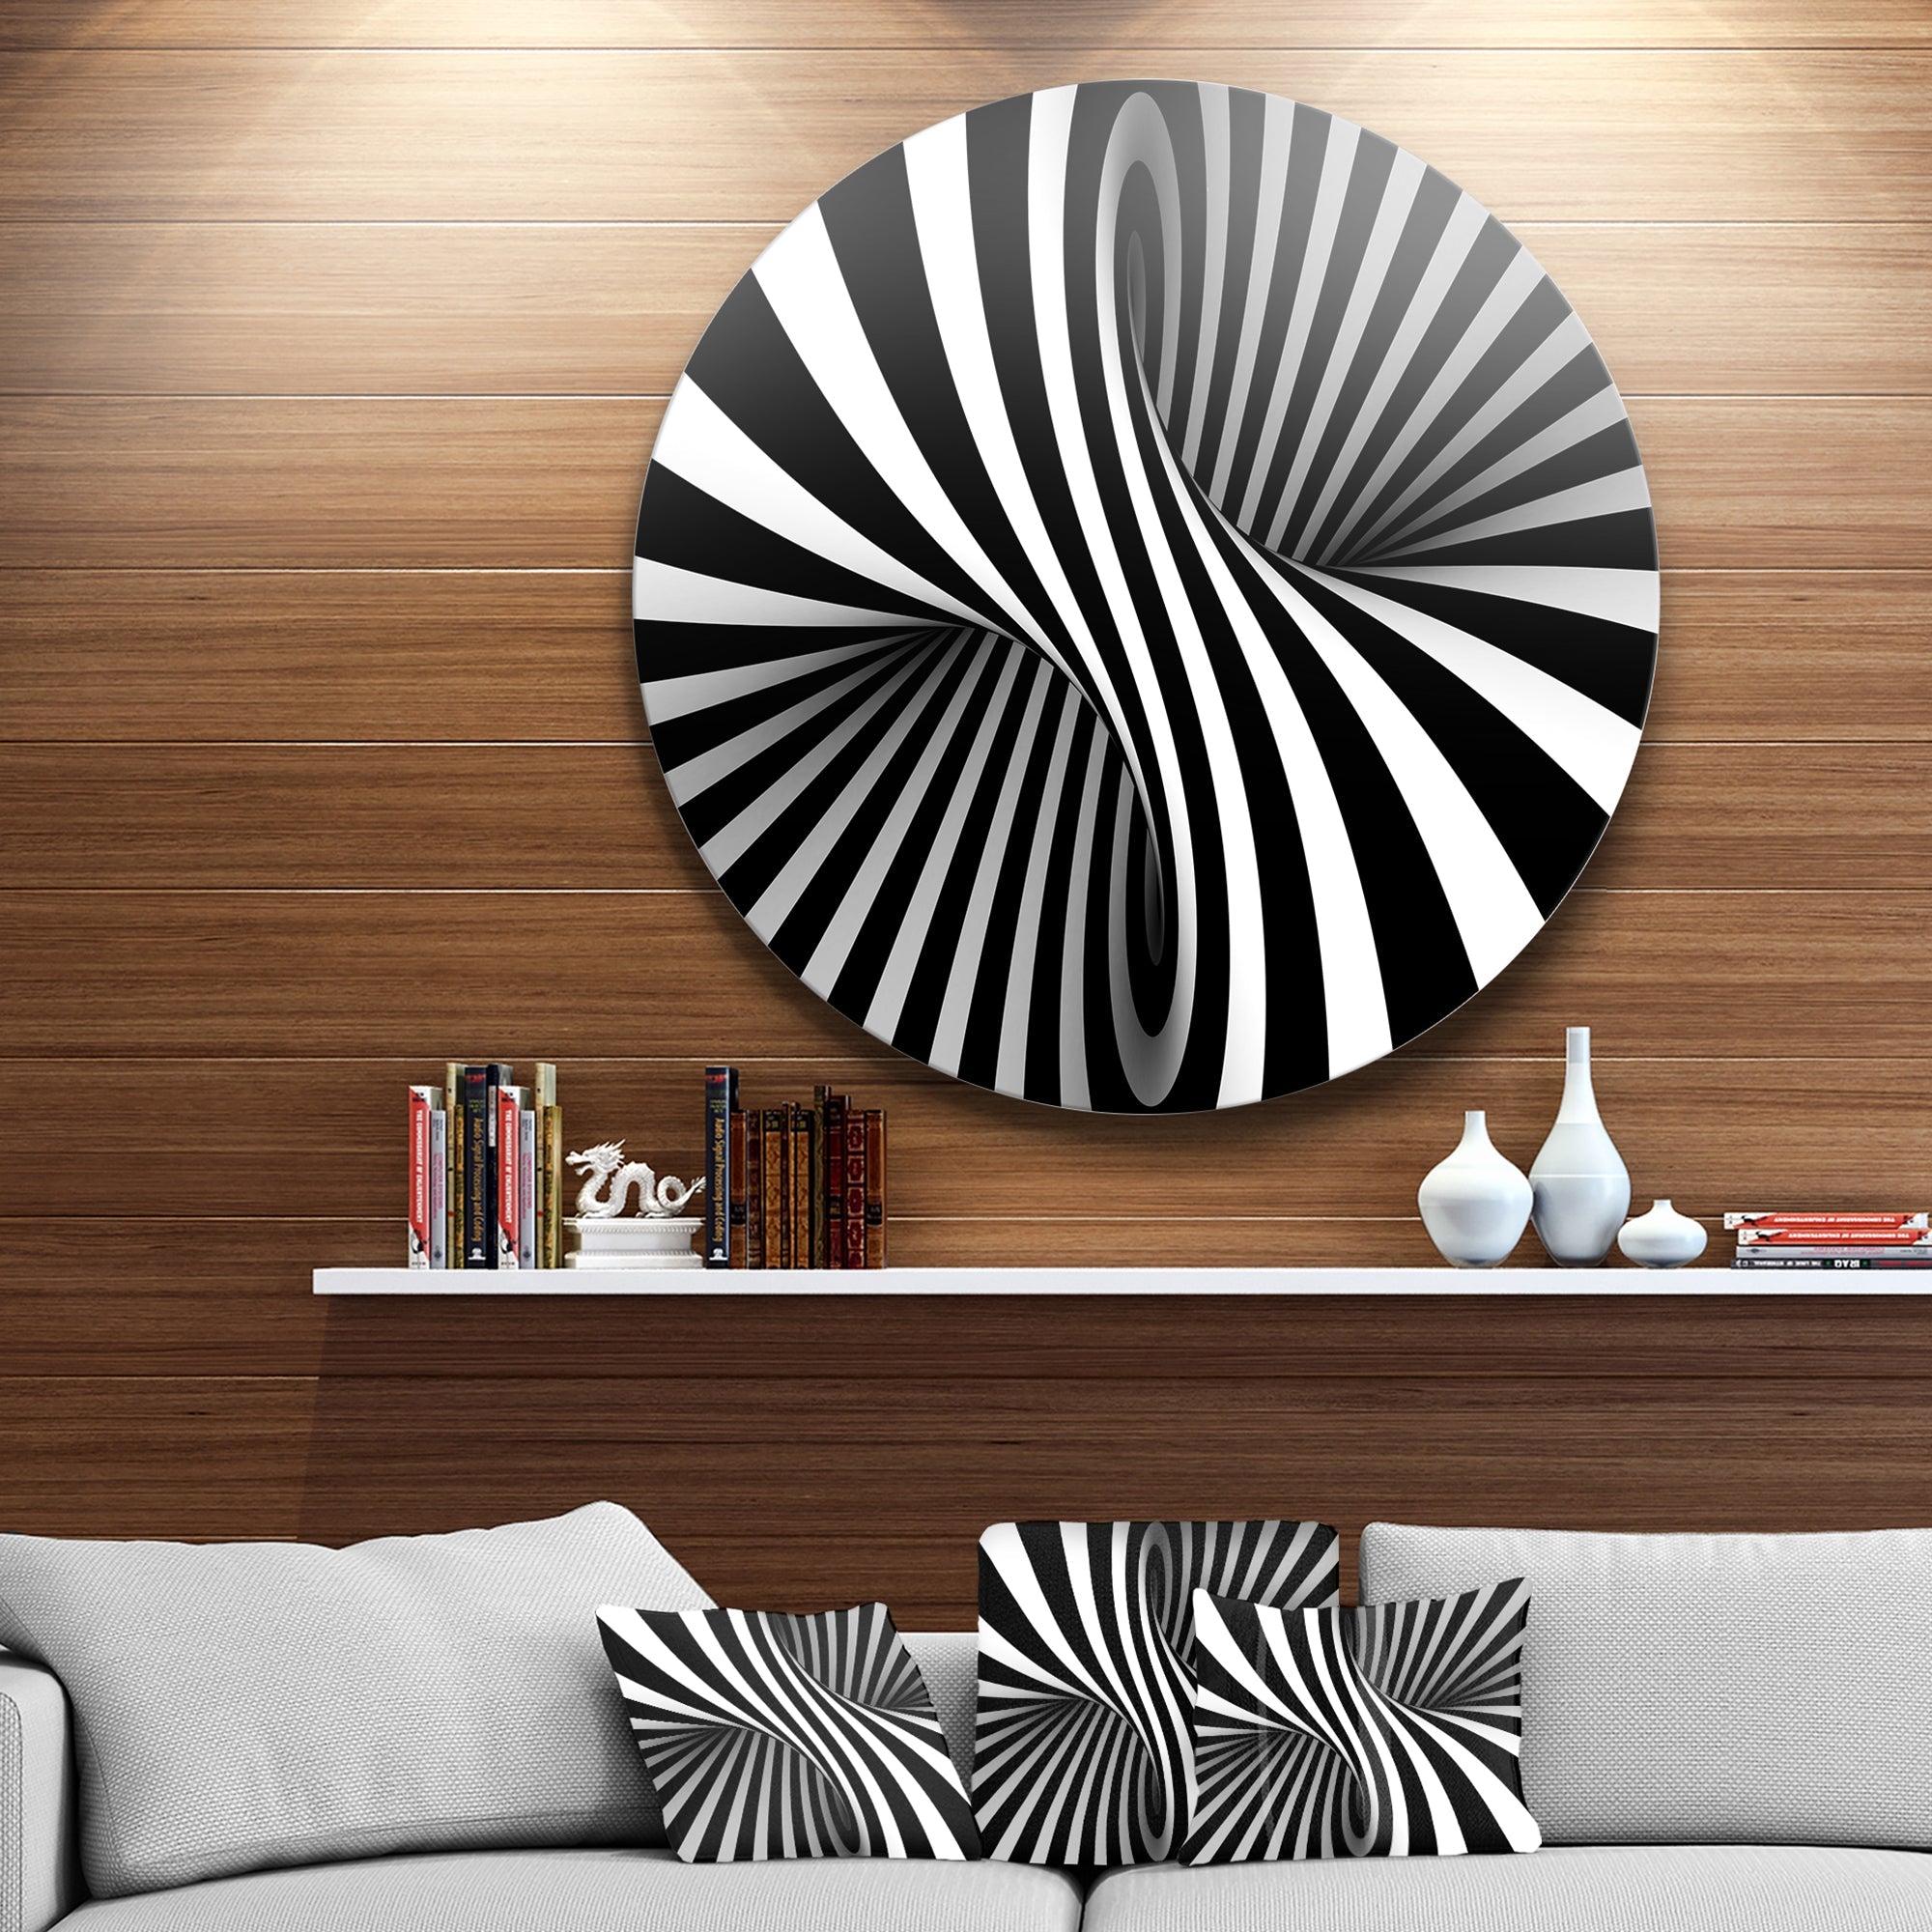 Black and White Spiral Disc Abstract Circle Metal Wall Art